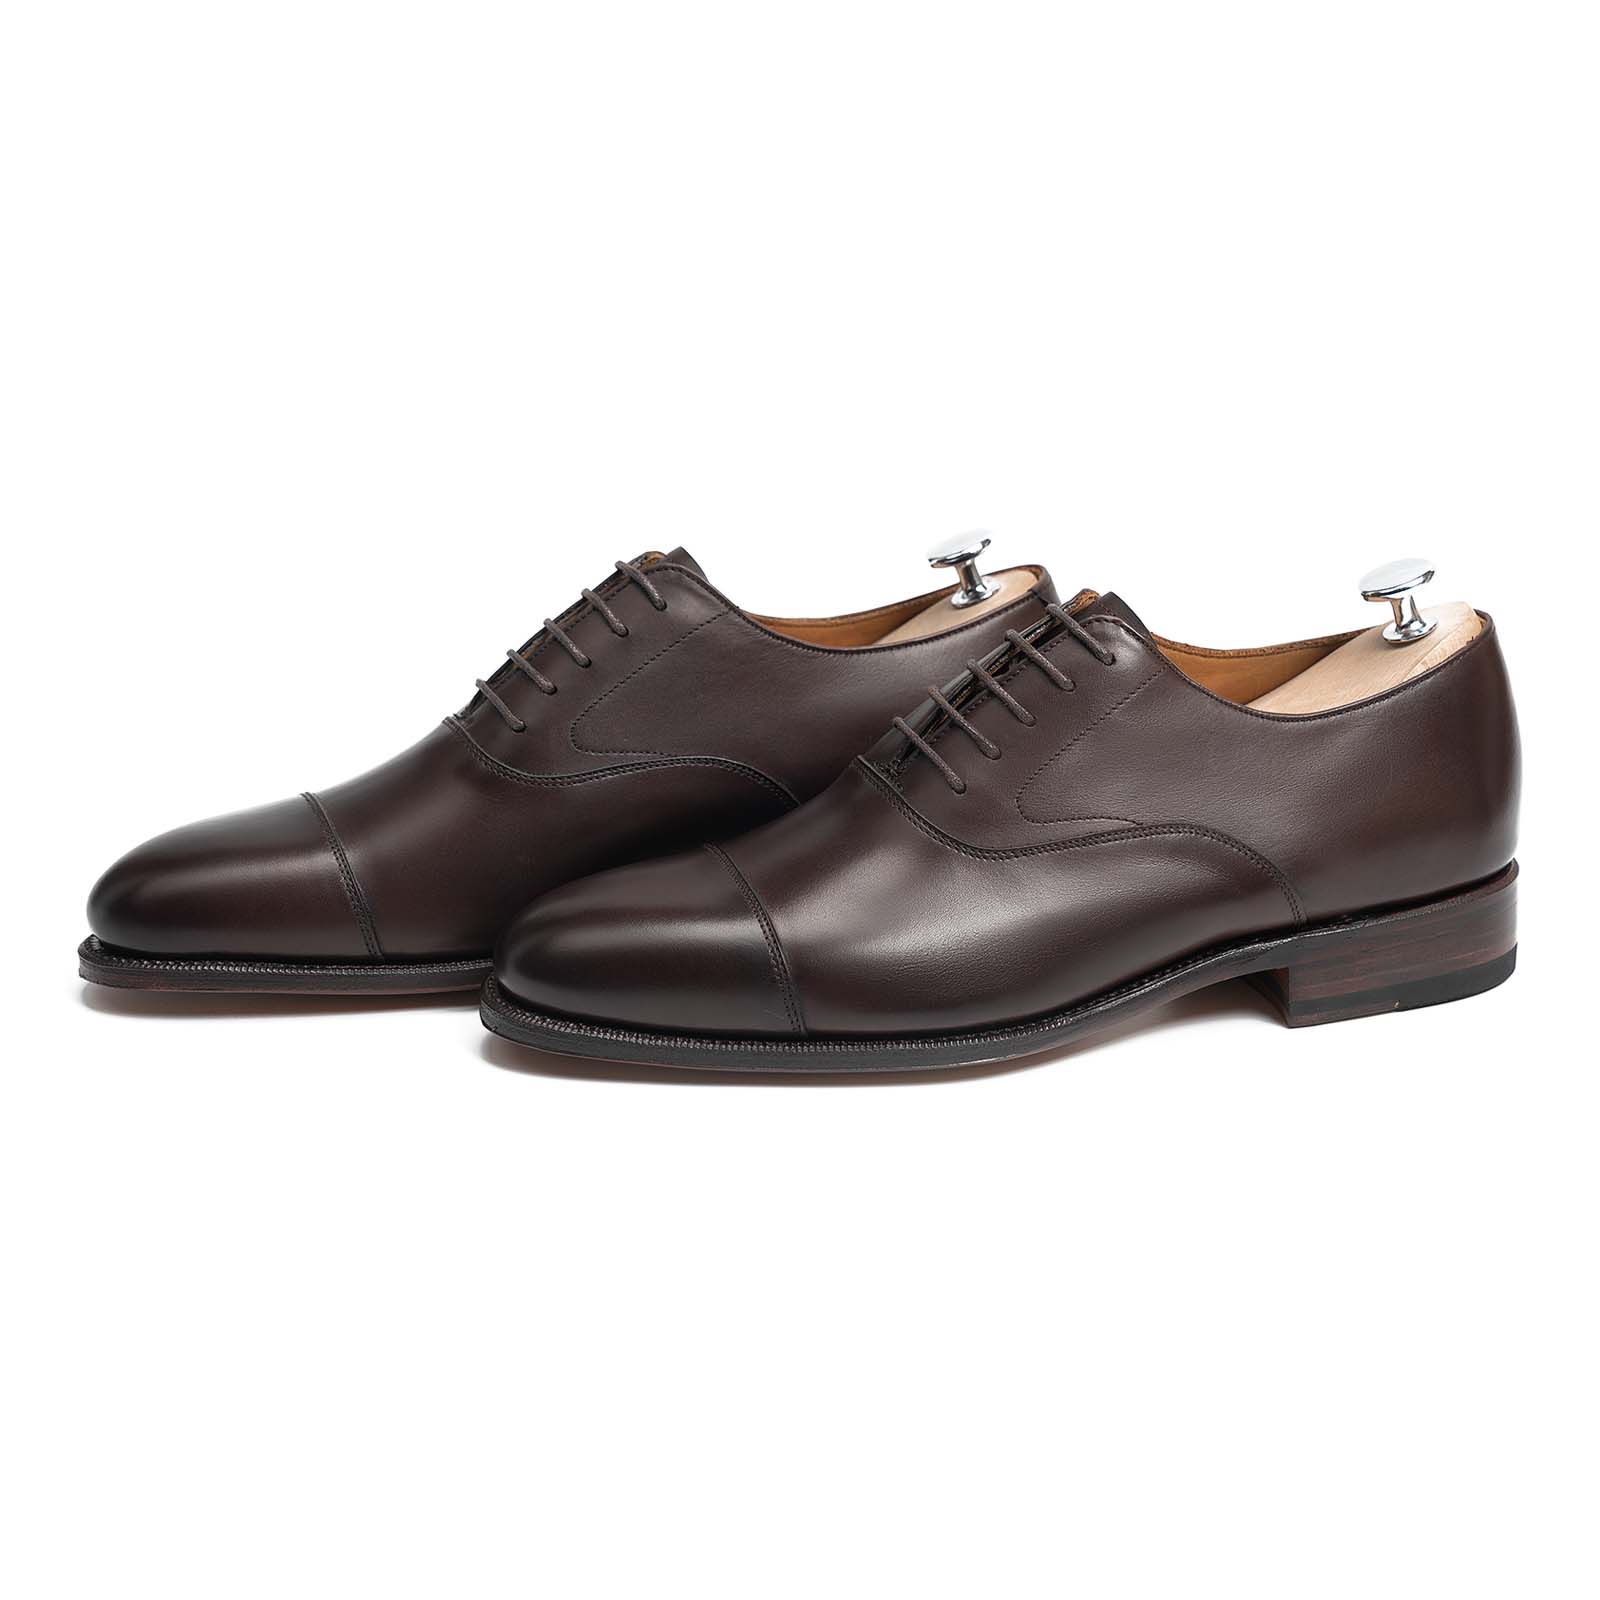 Brown Oxford shoes cap toe for men Miller Brown. Perfect Ceremony shoes